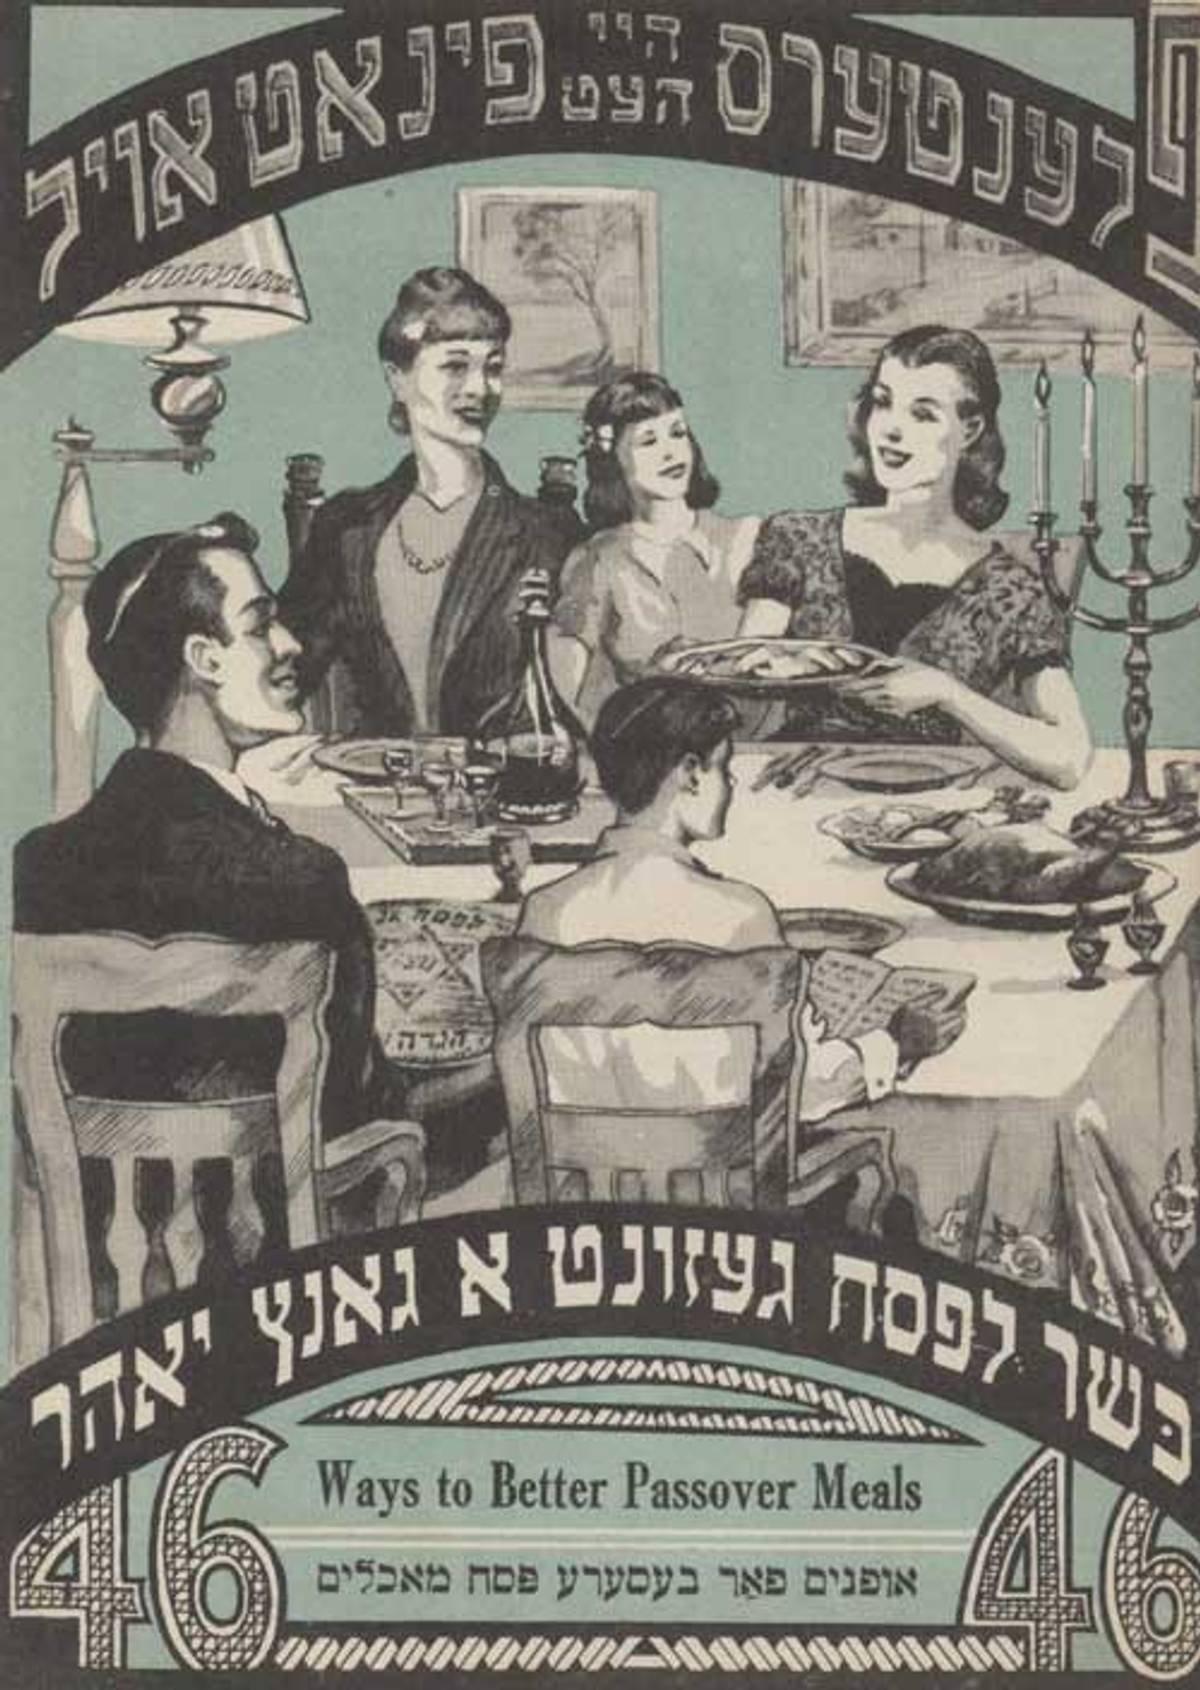 A 1940s promotional Passover cookbook, courtesy of Planter’s Peanut Oil